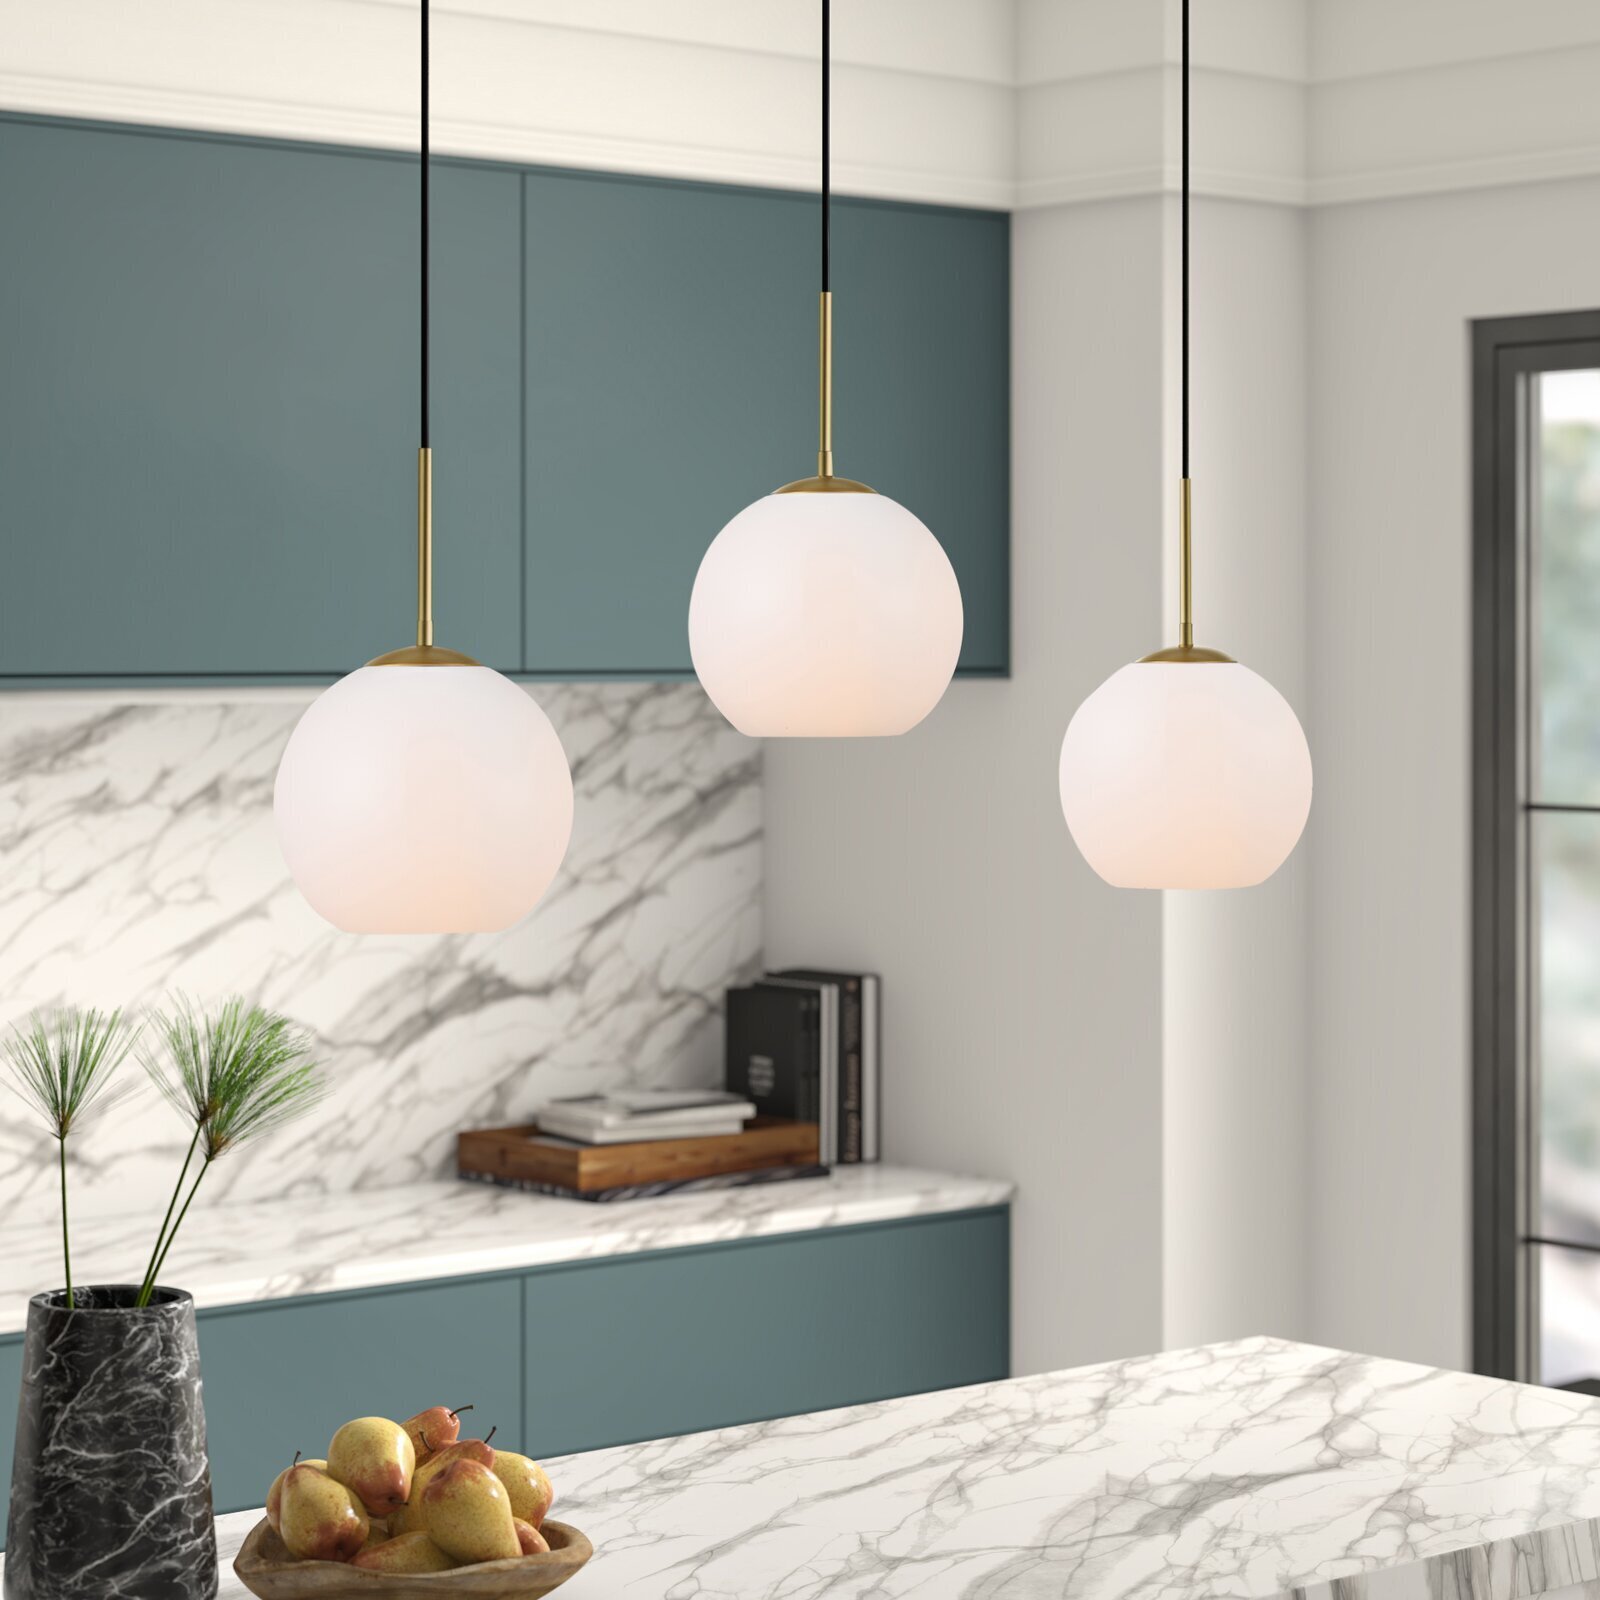 Three Dome Glass Pendant Lights for Kitchen Island